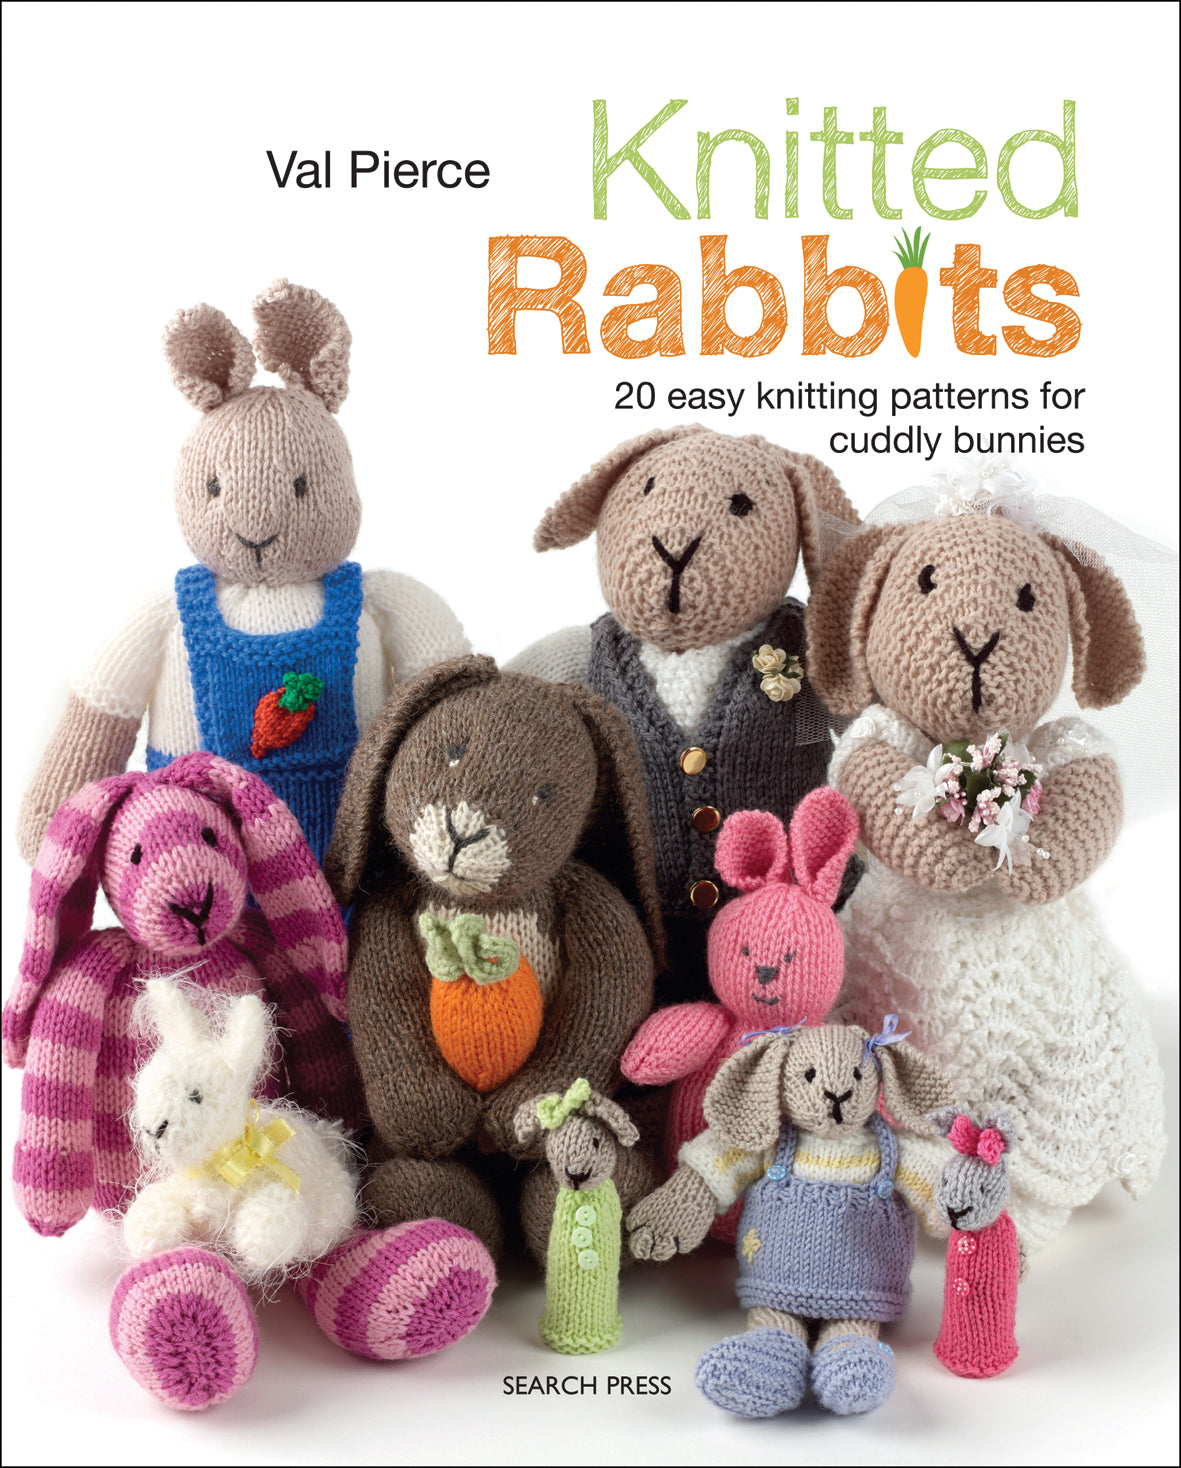 Knitted Rabbits by Val Pierce